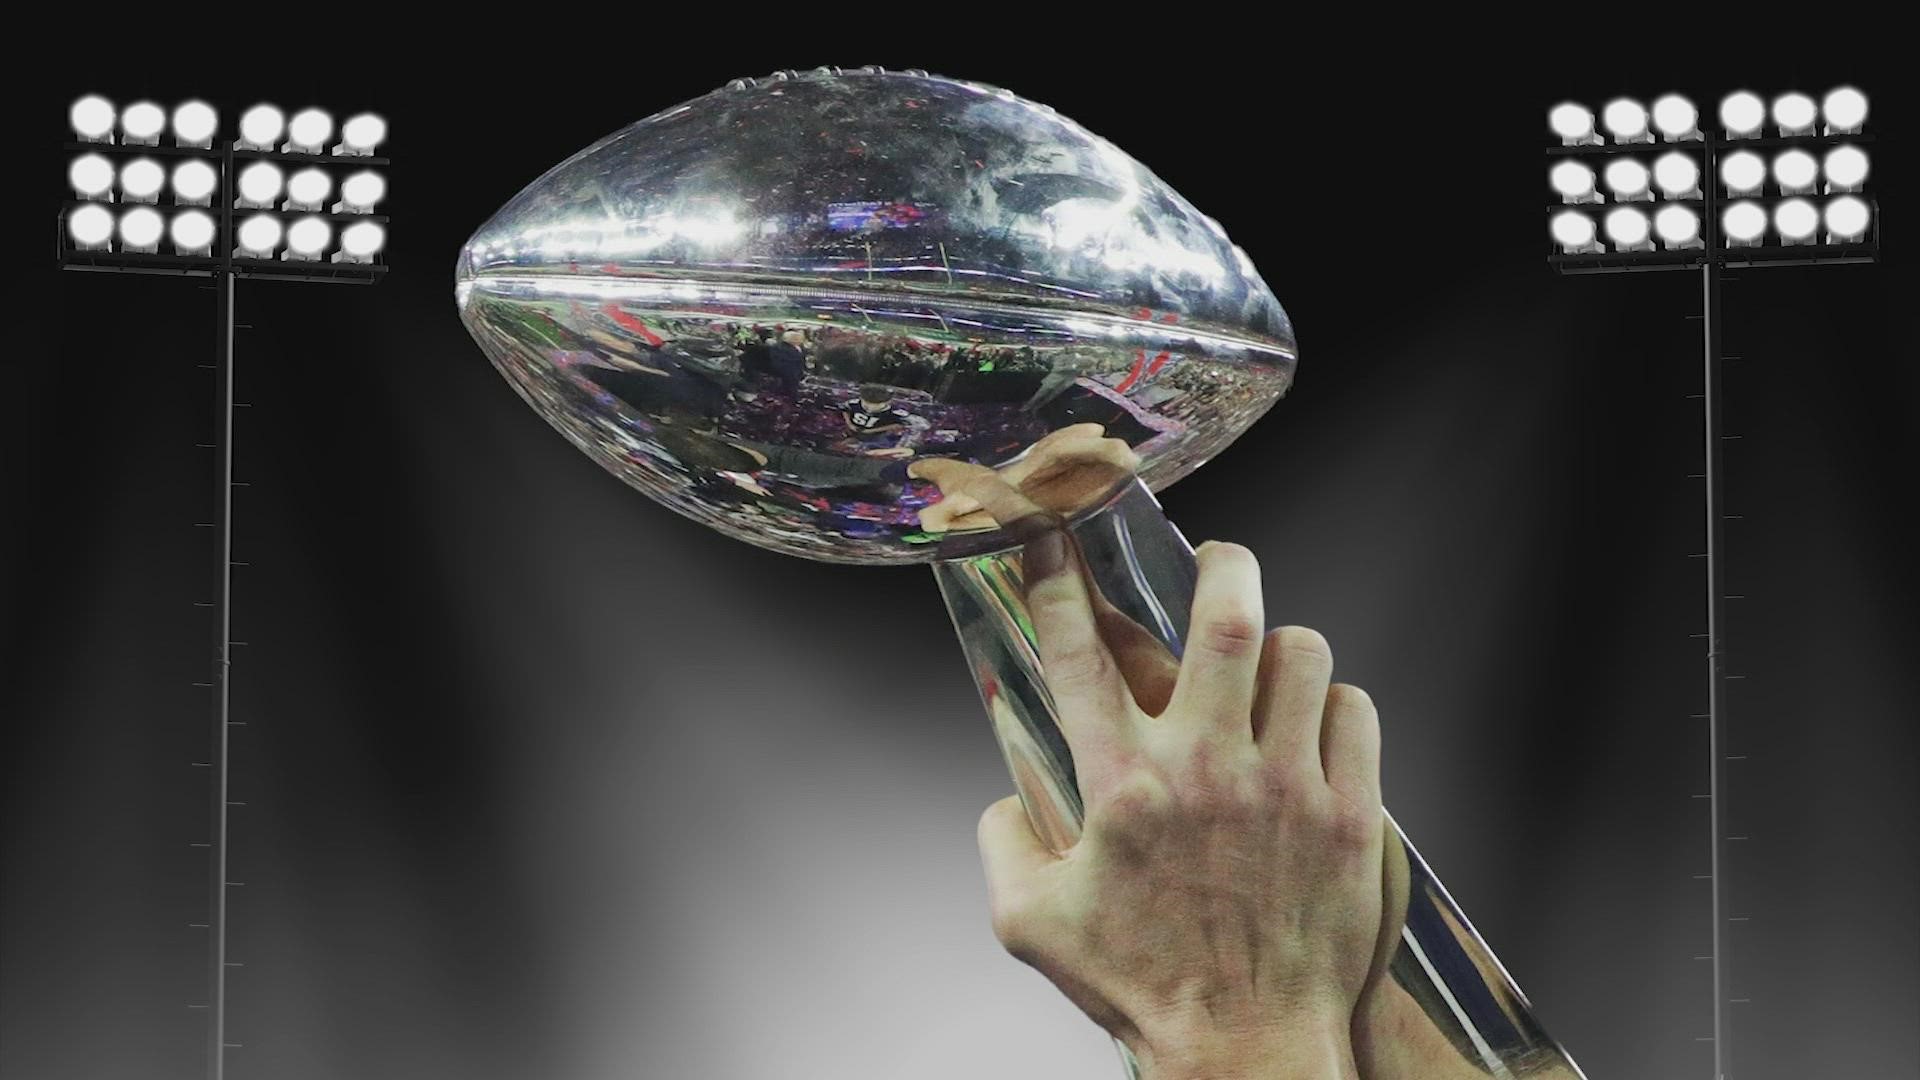 Fun facts about 2022 Super Bowl, according to WalletHub